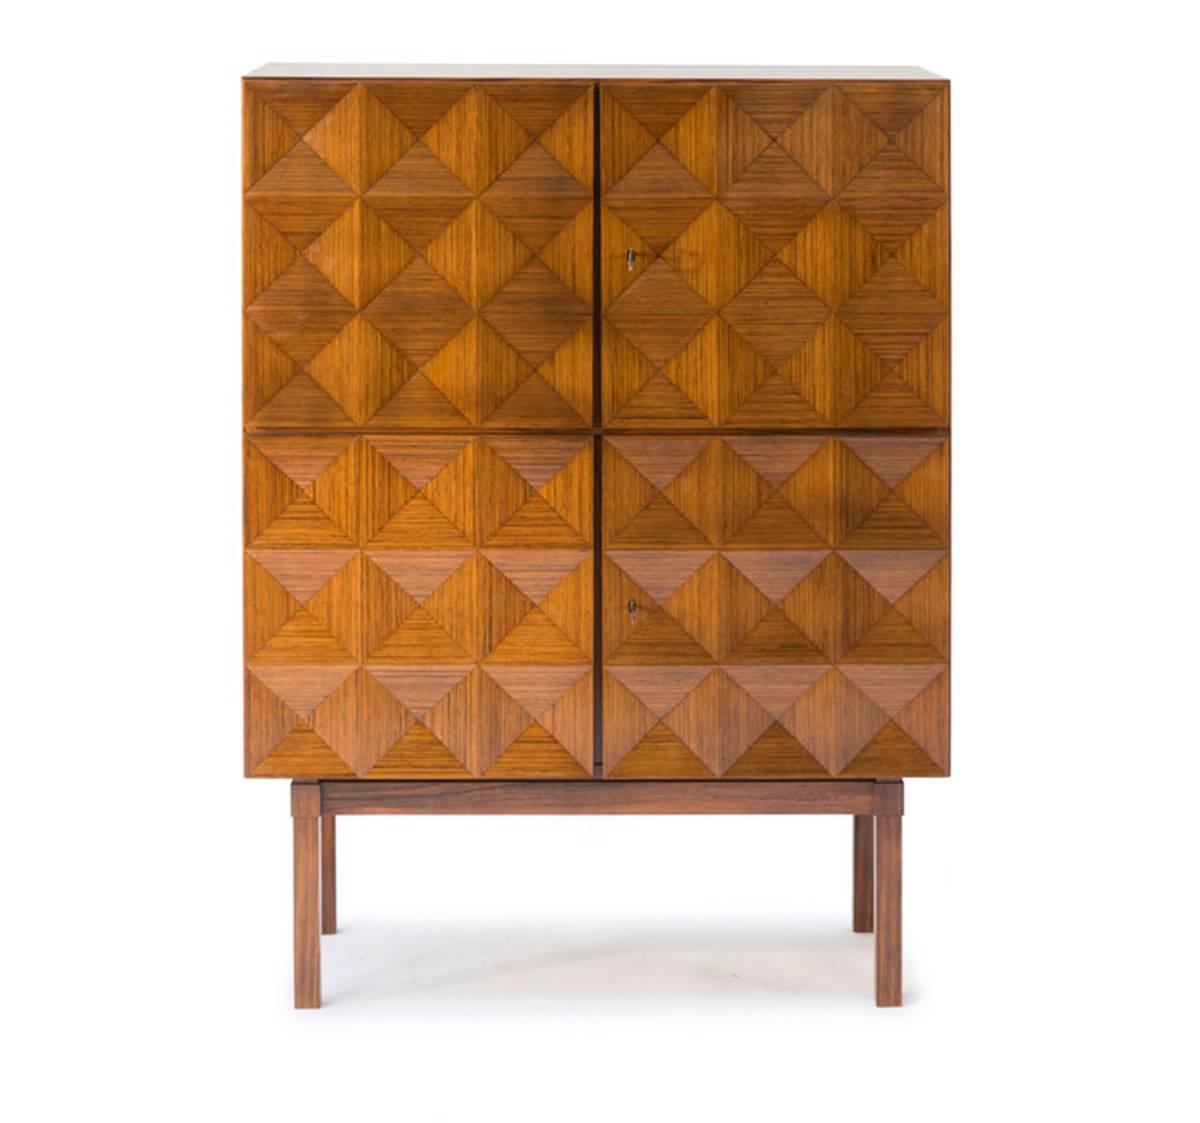 This subtle "brutal looking" highboard is a feast for the eye and in real life as beautiful as on the pictures. The piece bears a great resemblance to the work of Antoine Philippon and Jacqueline Lecoq for Behr. Especially the diamond